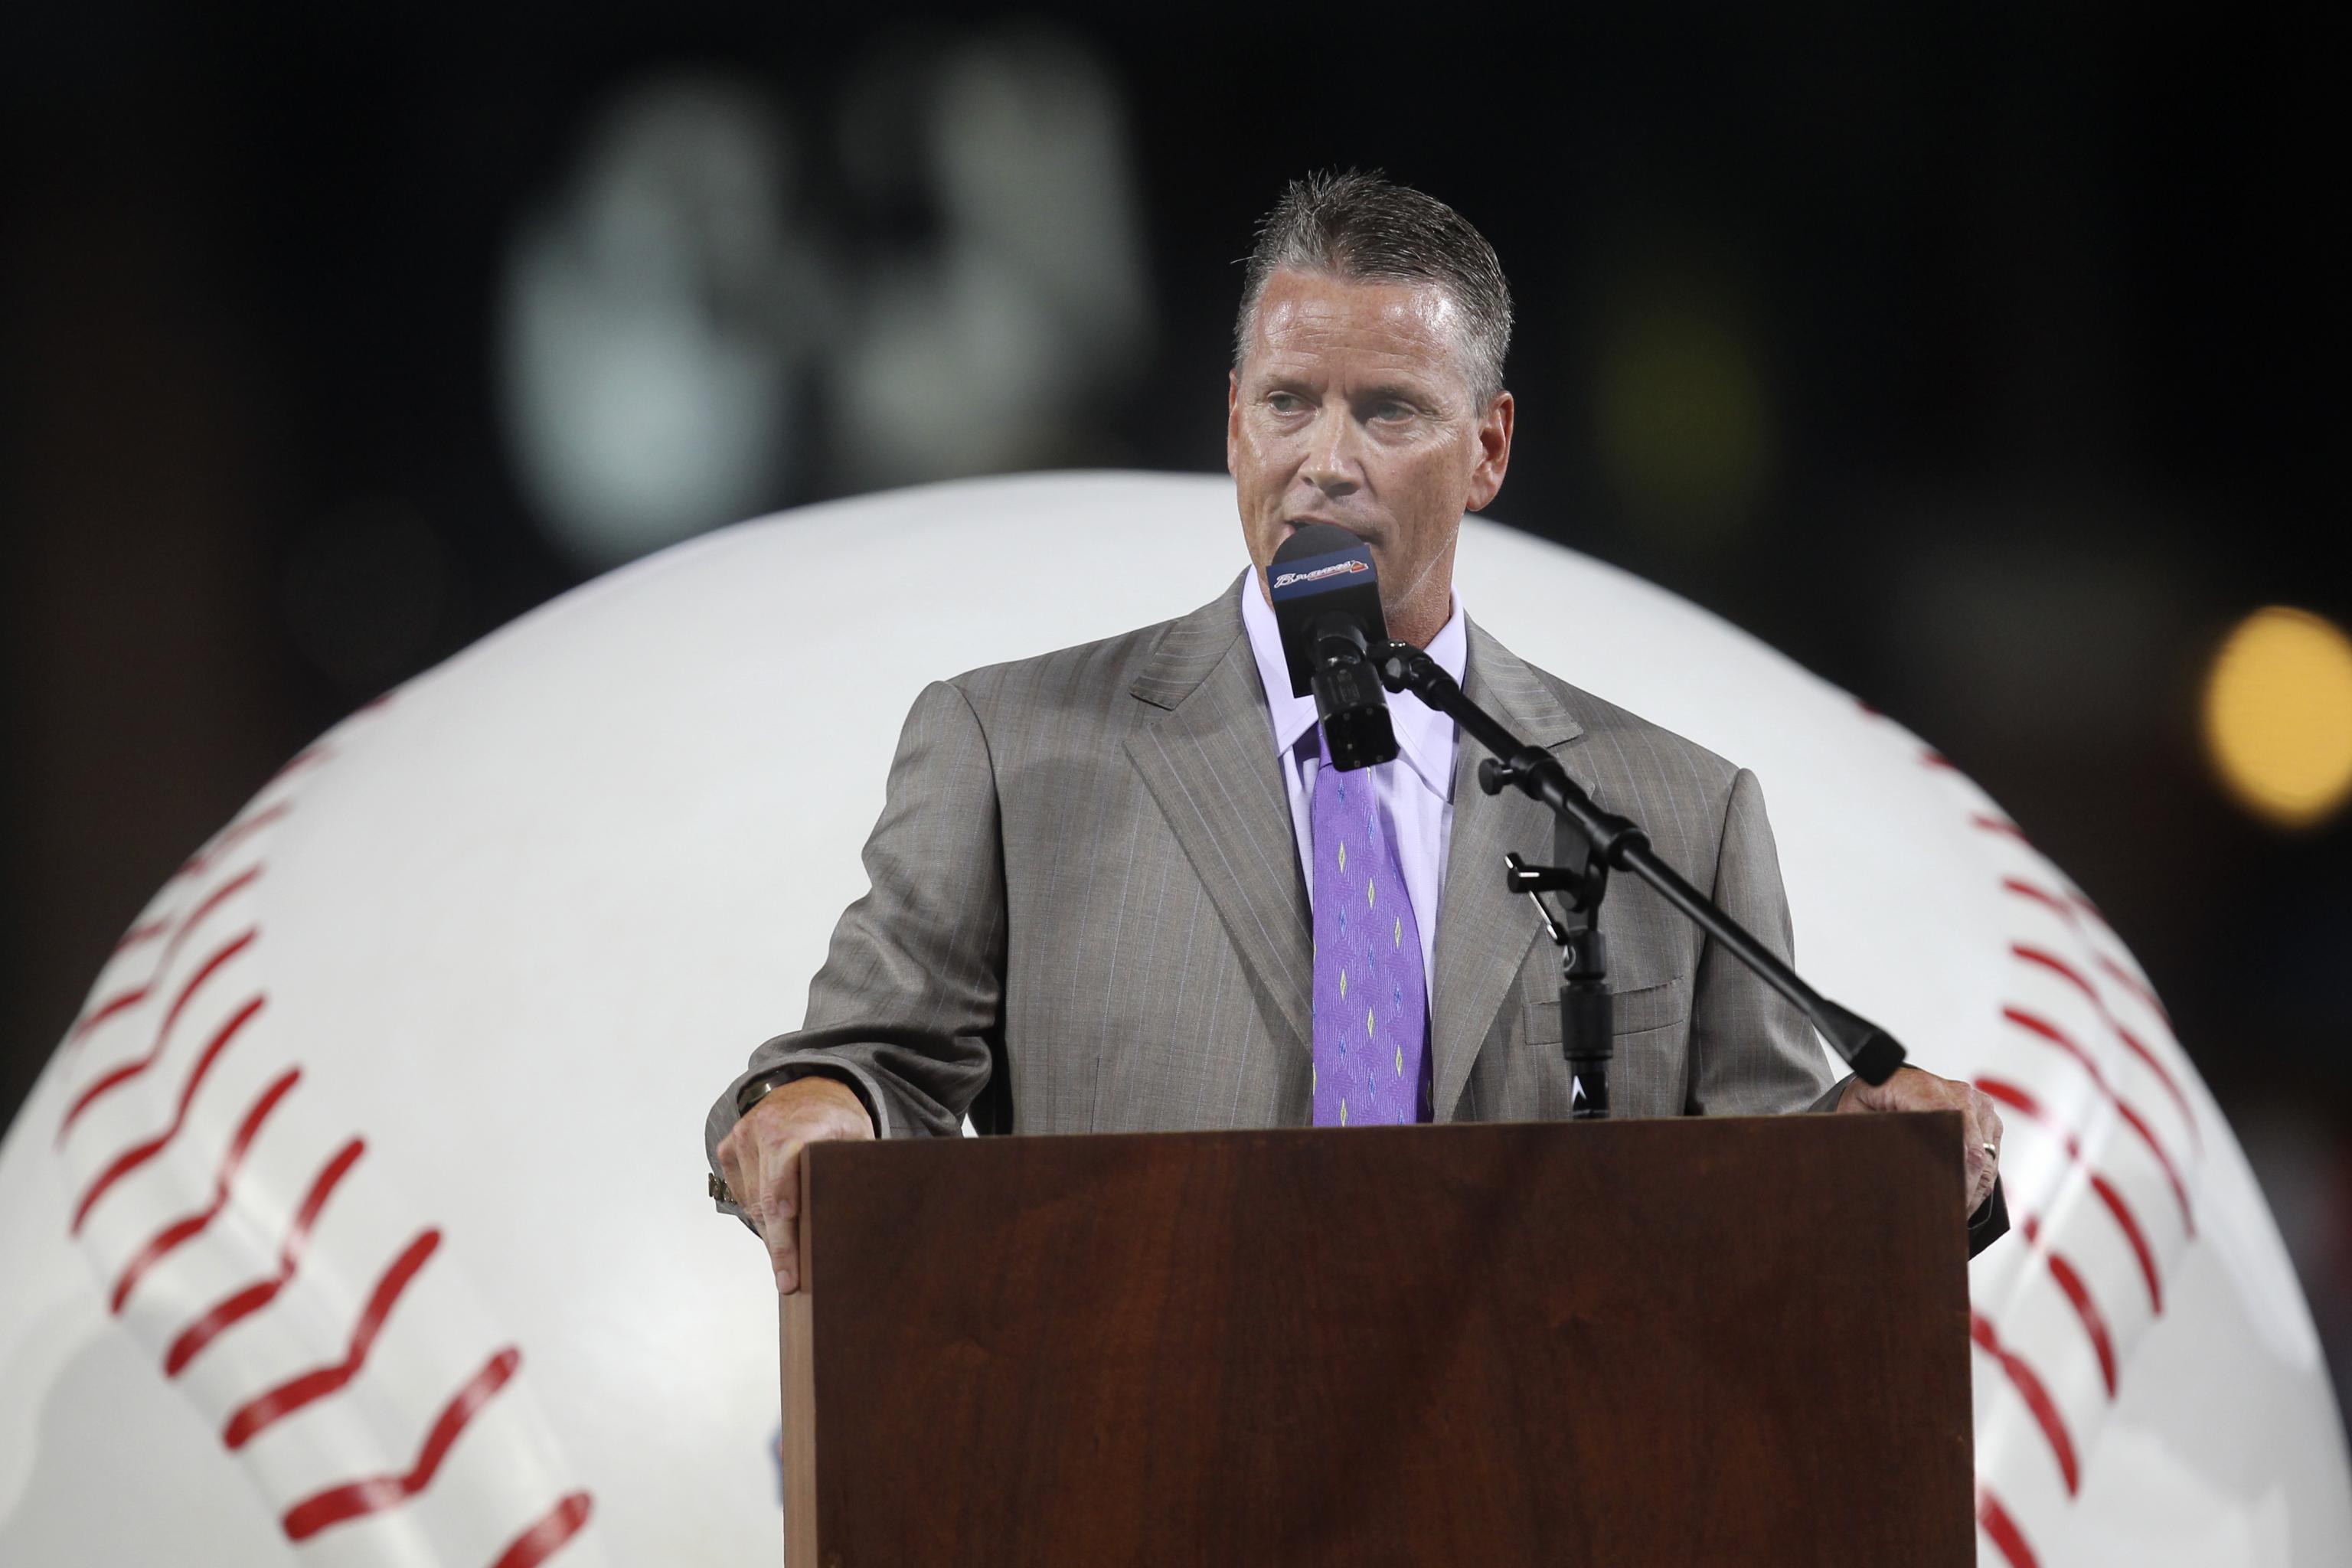 Tom Glavine: 'Even if players were 100% justified, they're still